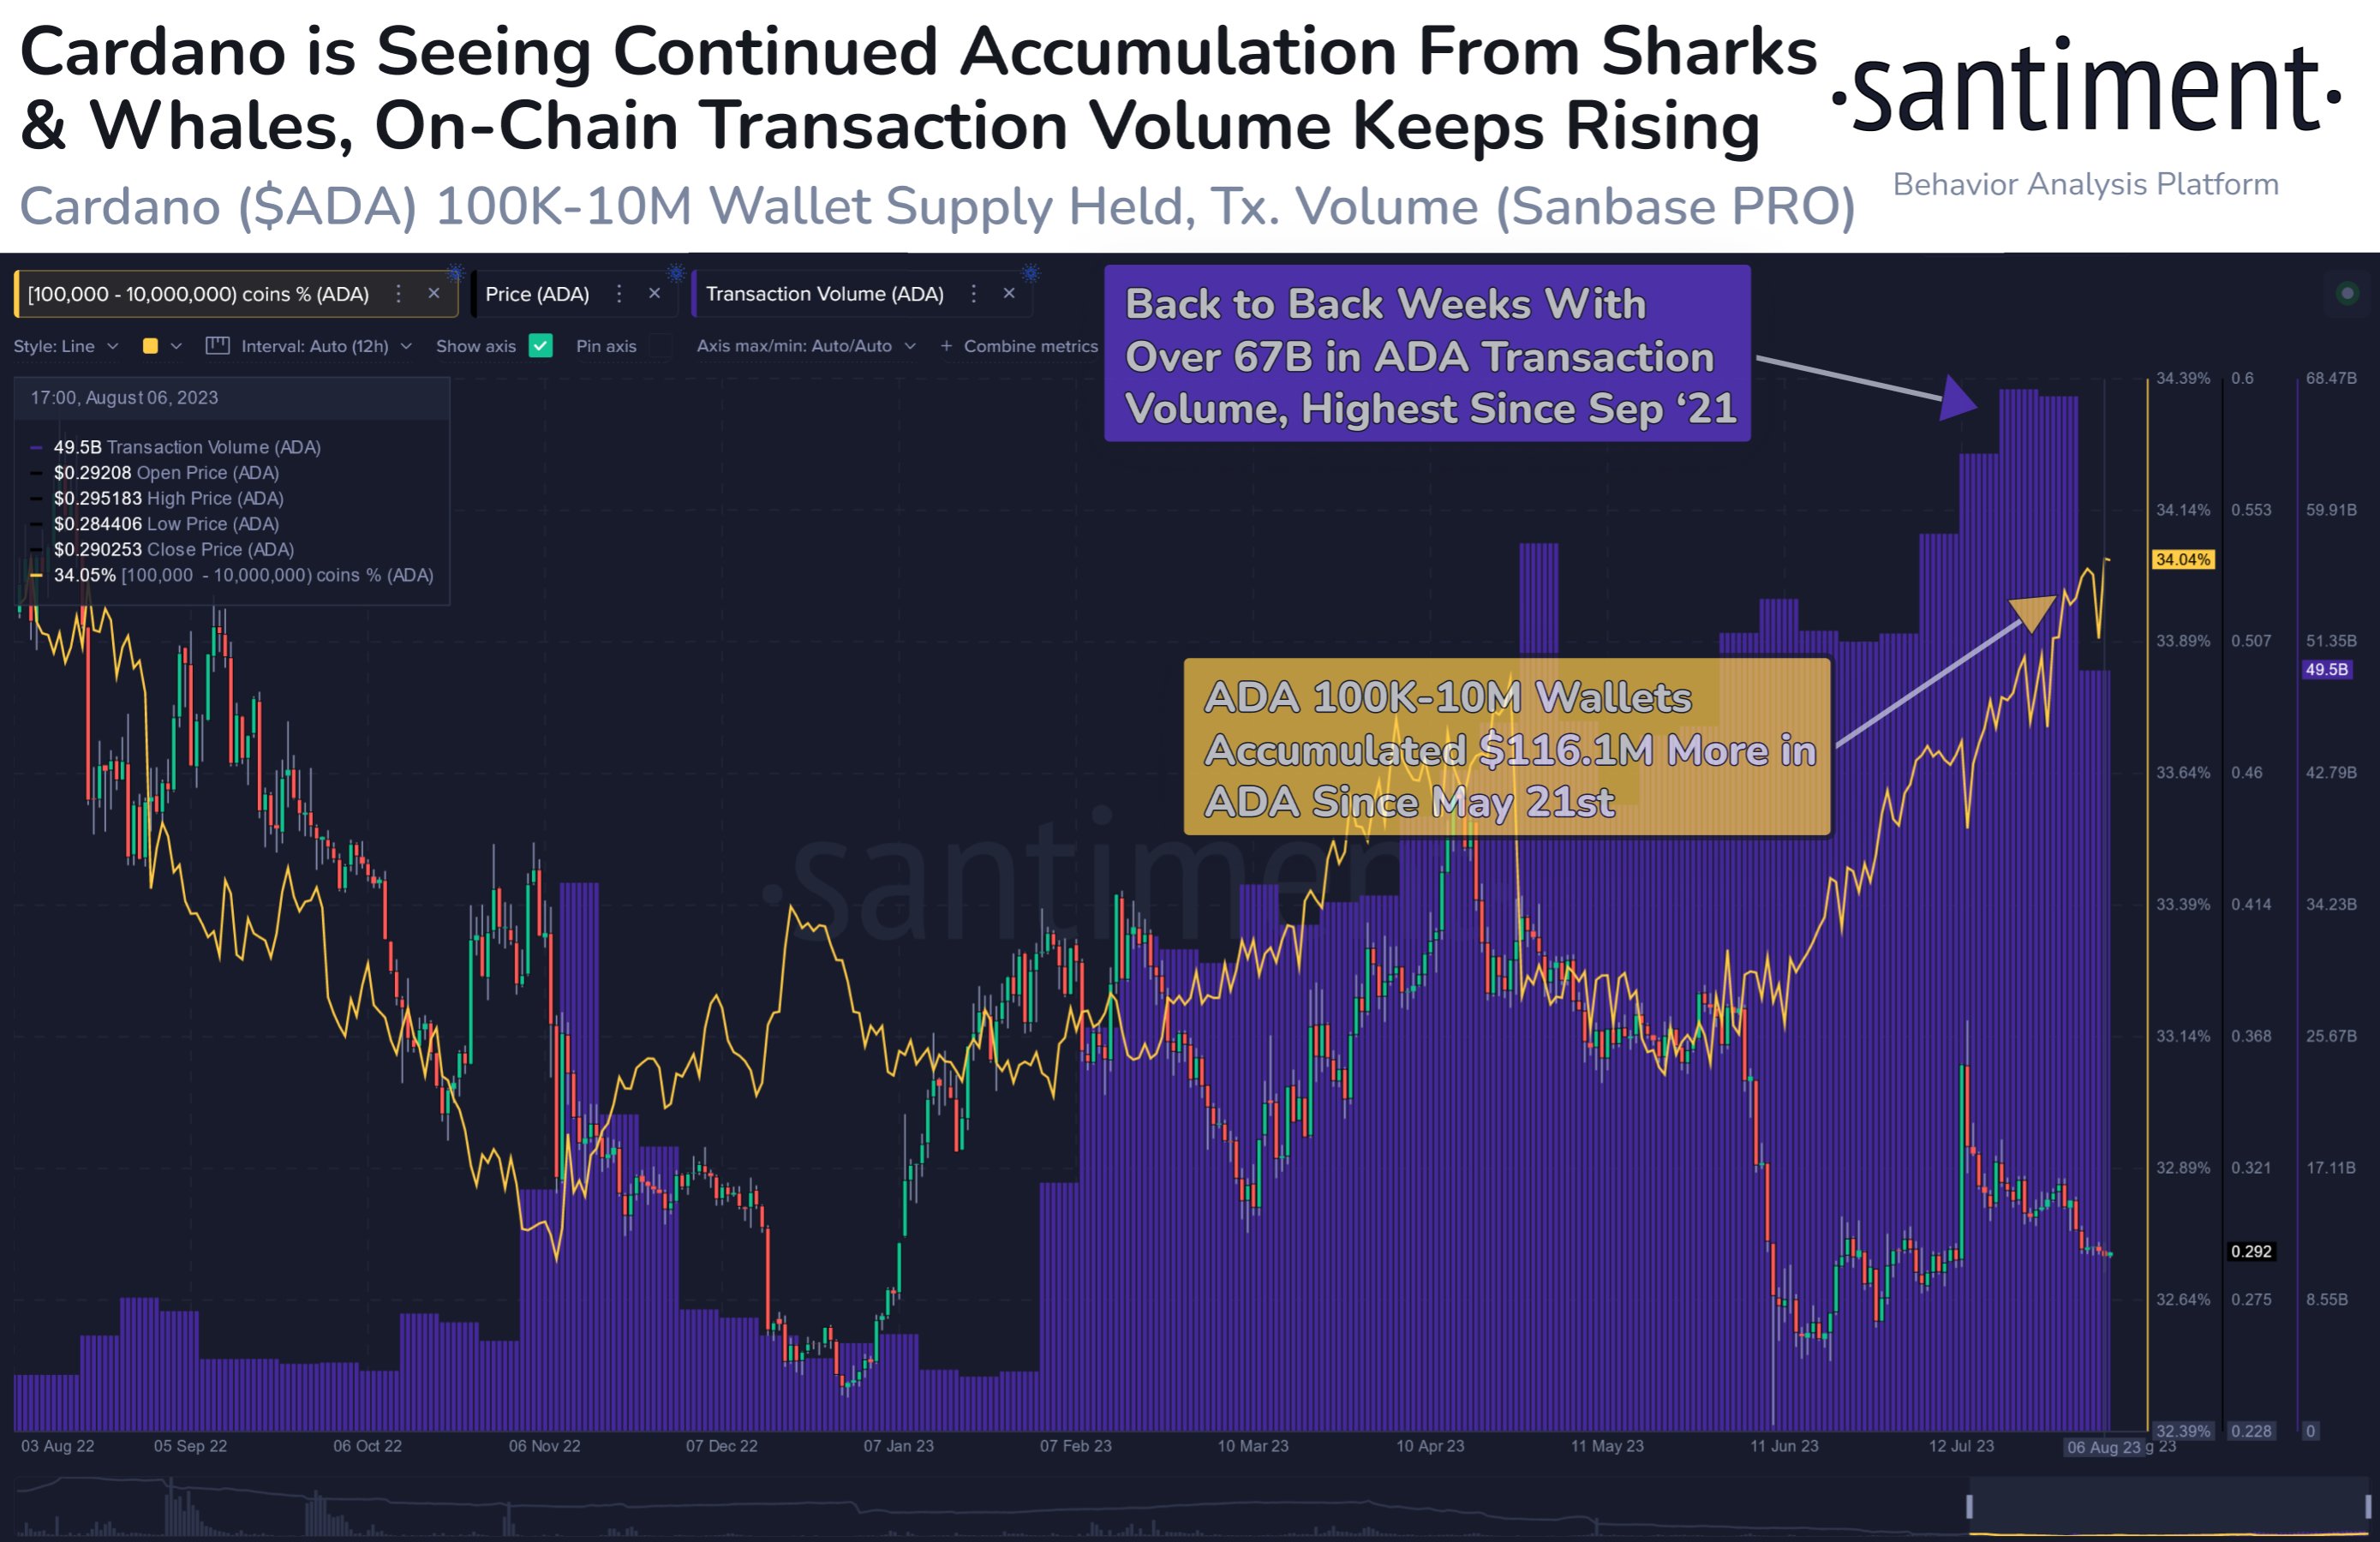 Cardano accumulation by large wallet investors